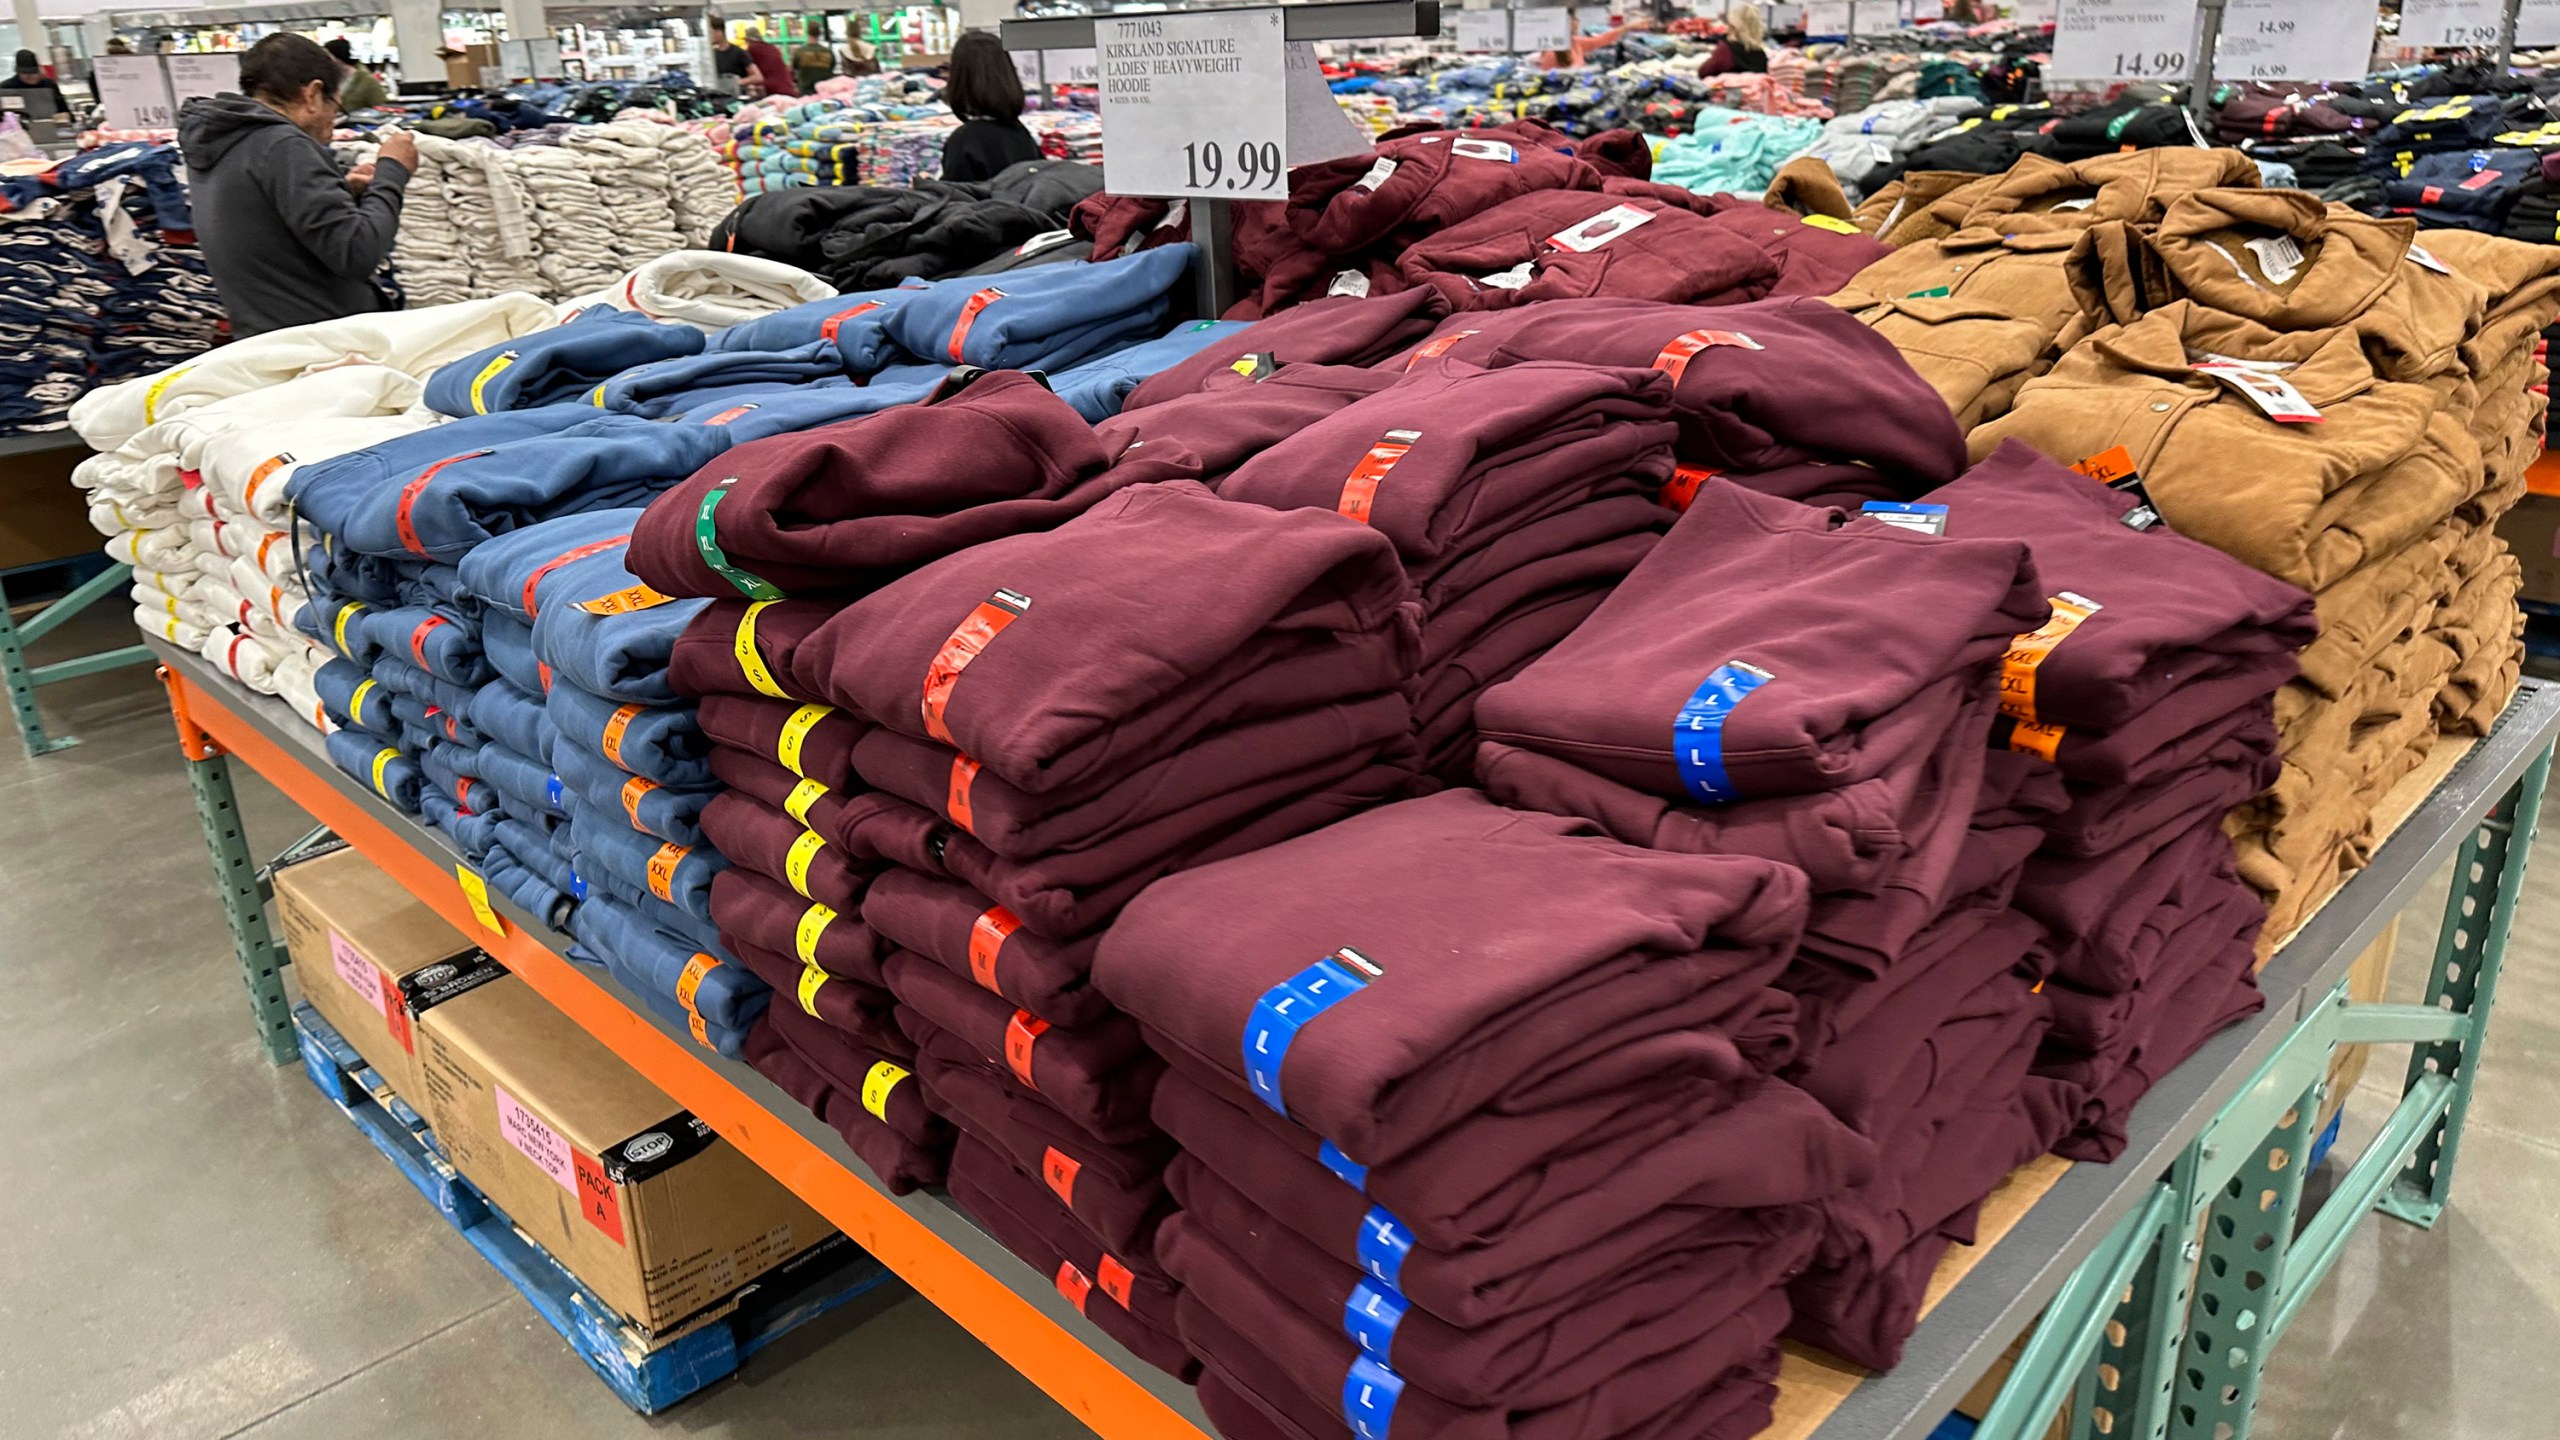 Shoppers peruse stacks of hoodies on display in a Costco warehouse Tuesday, Jan. 30, 2024, in Timnath, Colo. The Commerce Department releases U.S. retail sales data for January on Thursday, Feb. 15, 2024. (AP Photo/David Zalubowski)